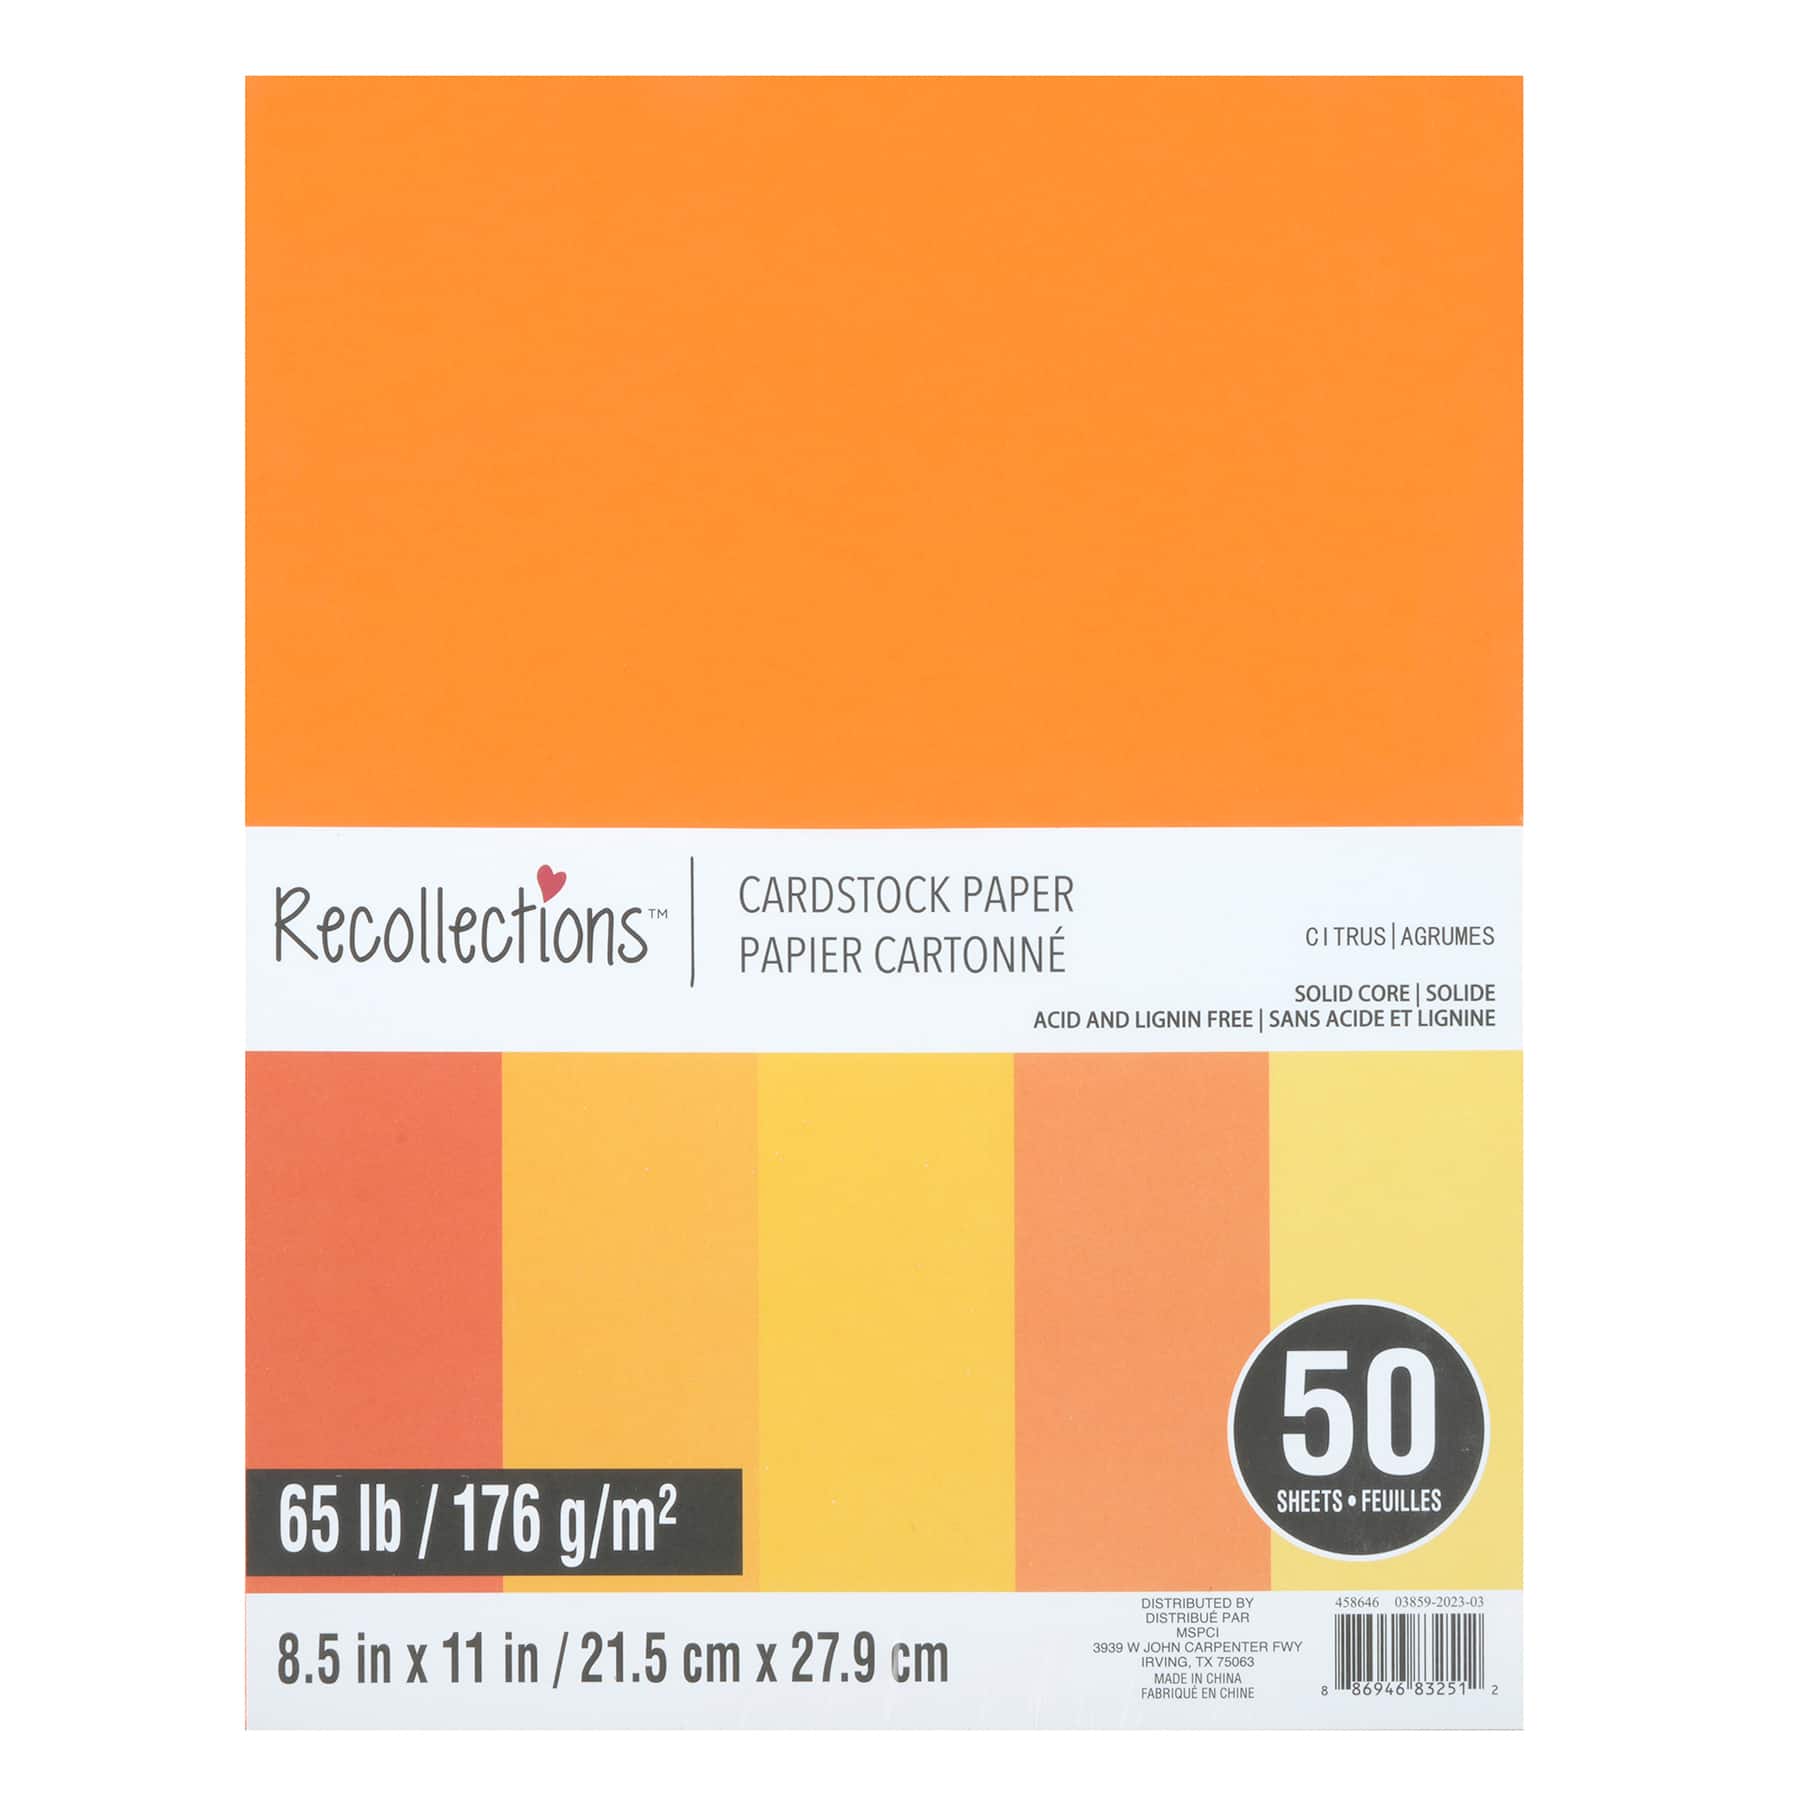 Citrus 8.5 x 11 Cardstock Paper by Recollections™, 50 Sheets